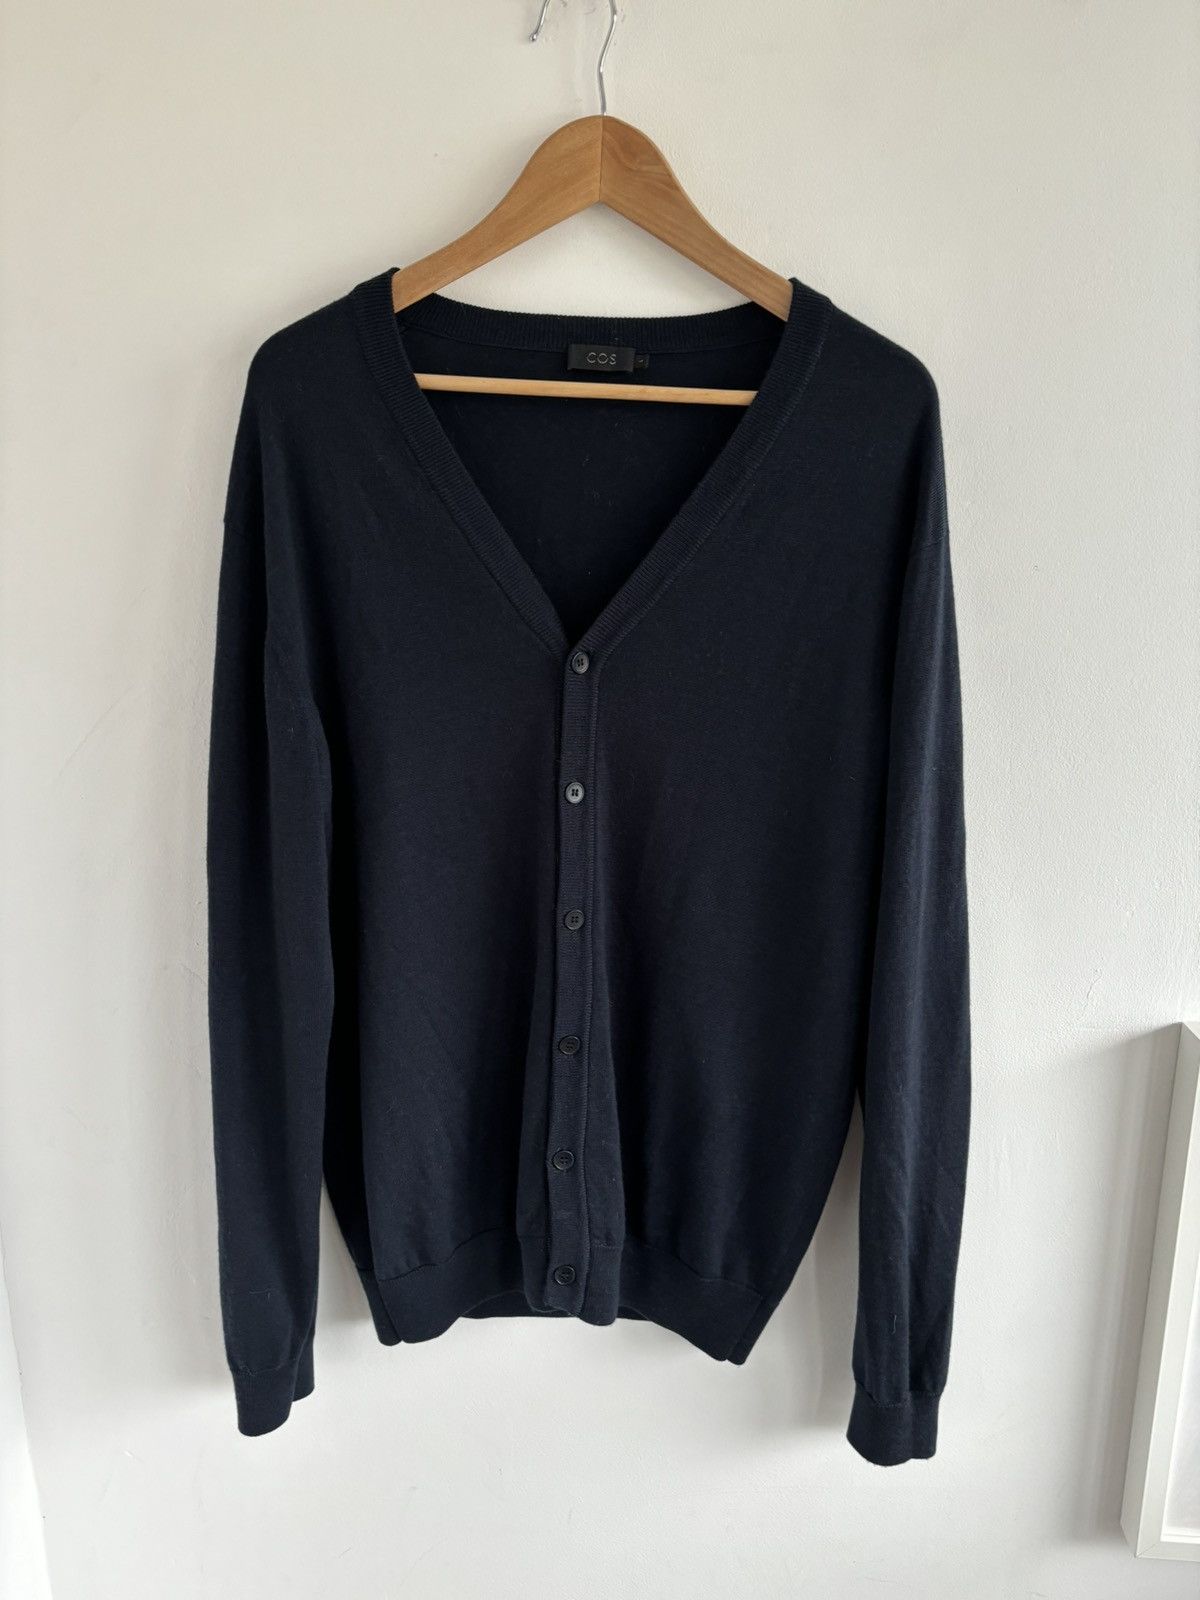 Cos COS Light Merino Wool Knitted Cardigan | Grailed